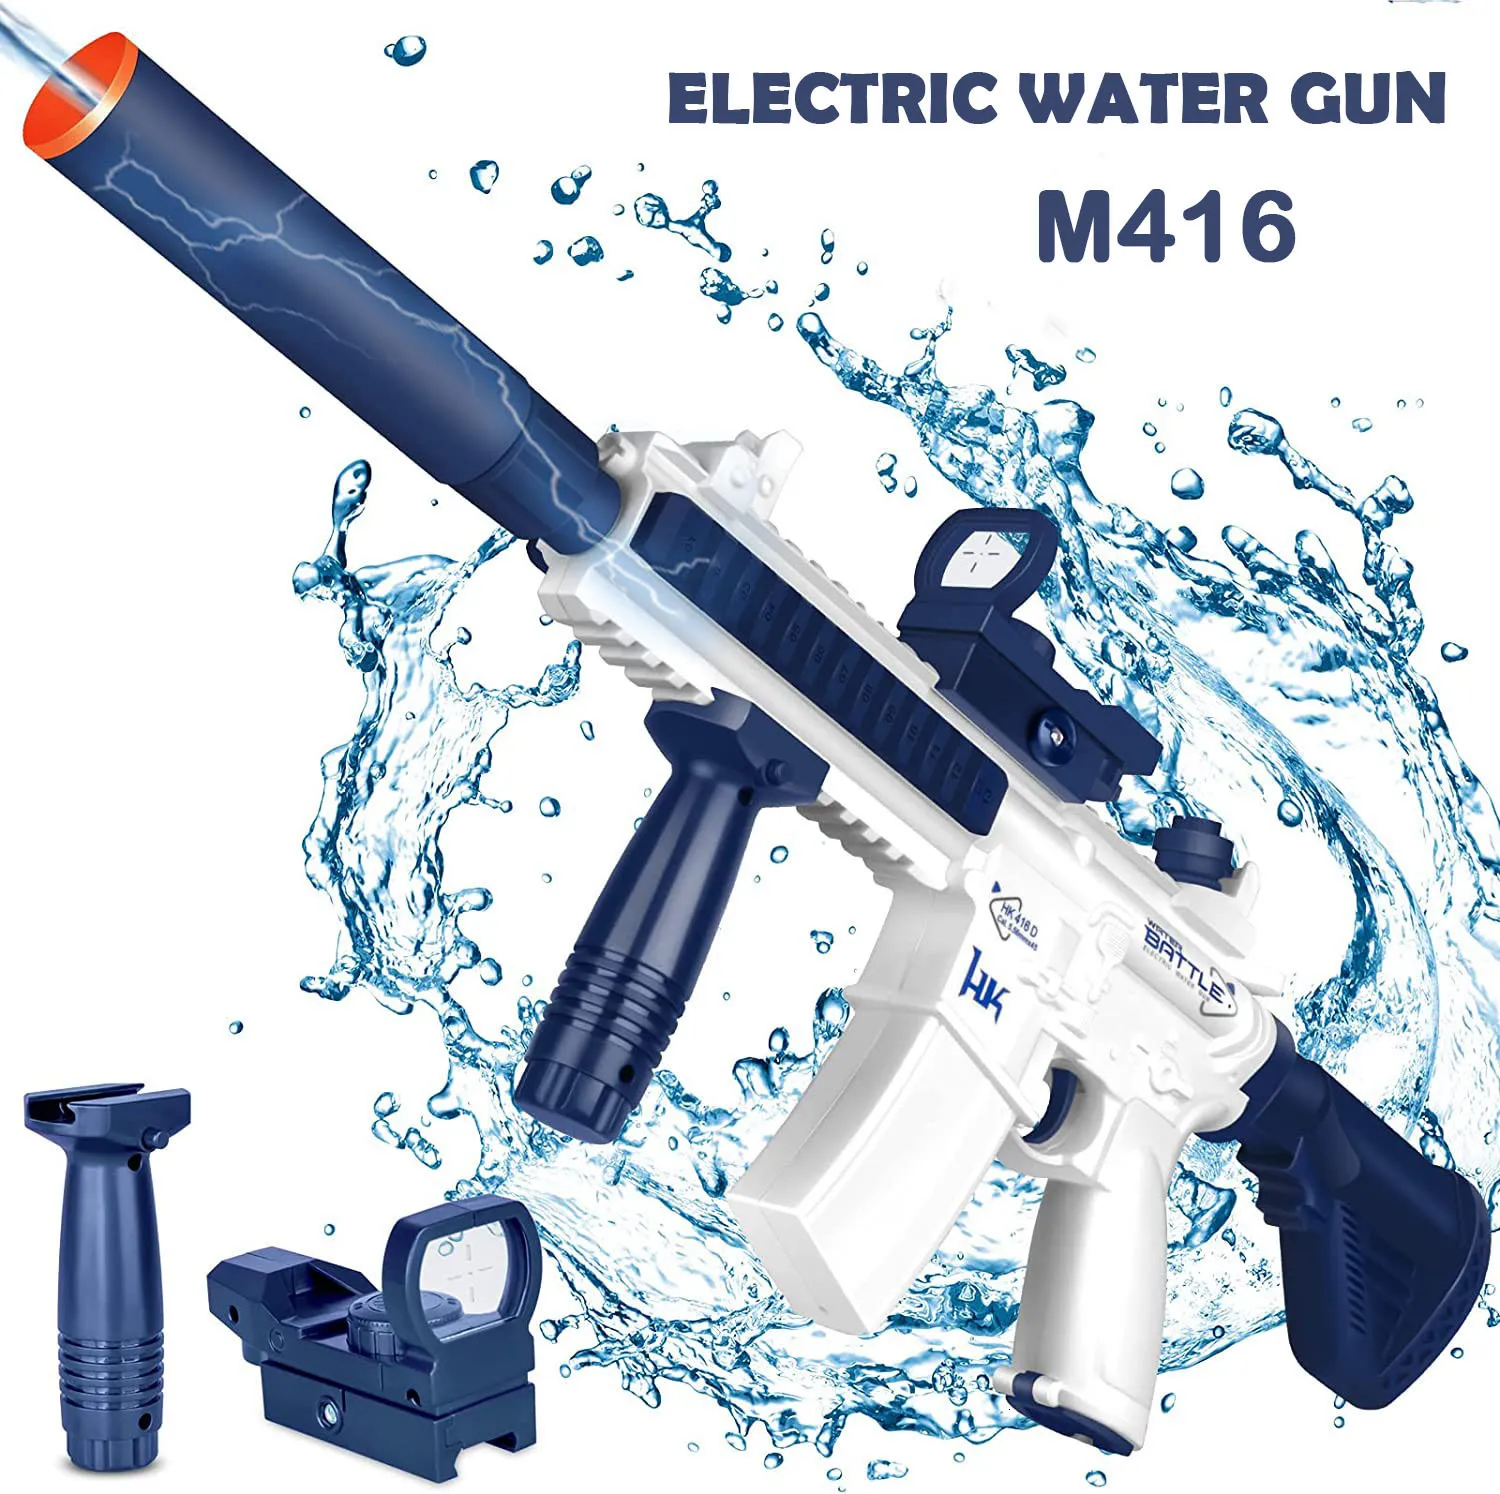 Sand Play Water Fun Gun Electric Toy M416 Super Automatic Guns Glock Swimming Pool Beach Party Game Outdoor Fight for Kids Gift 230617